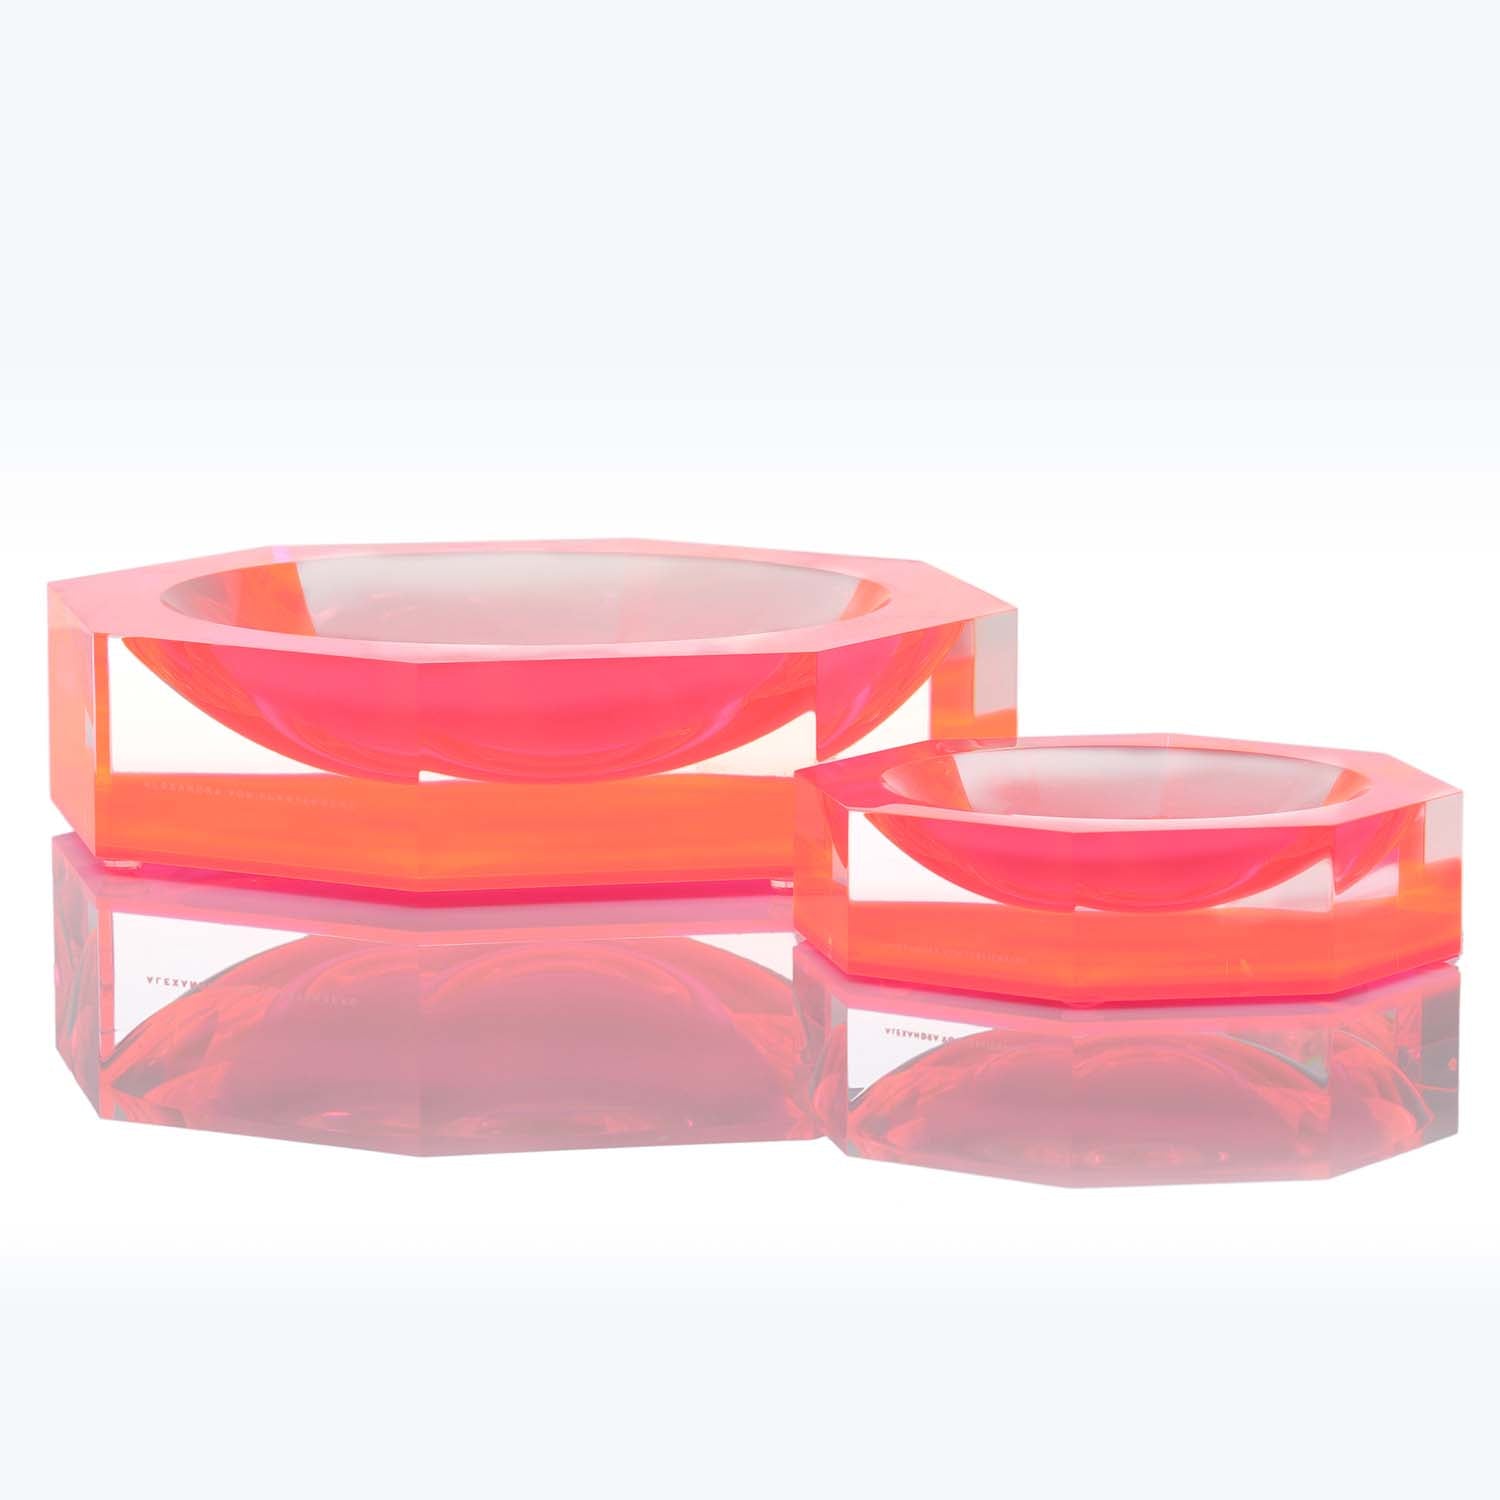 Two translucent, modern and stylish acrylic bowls in neon pink.